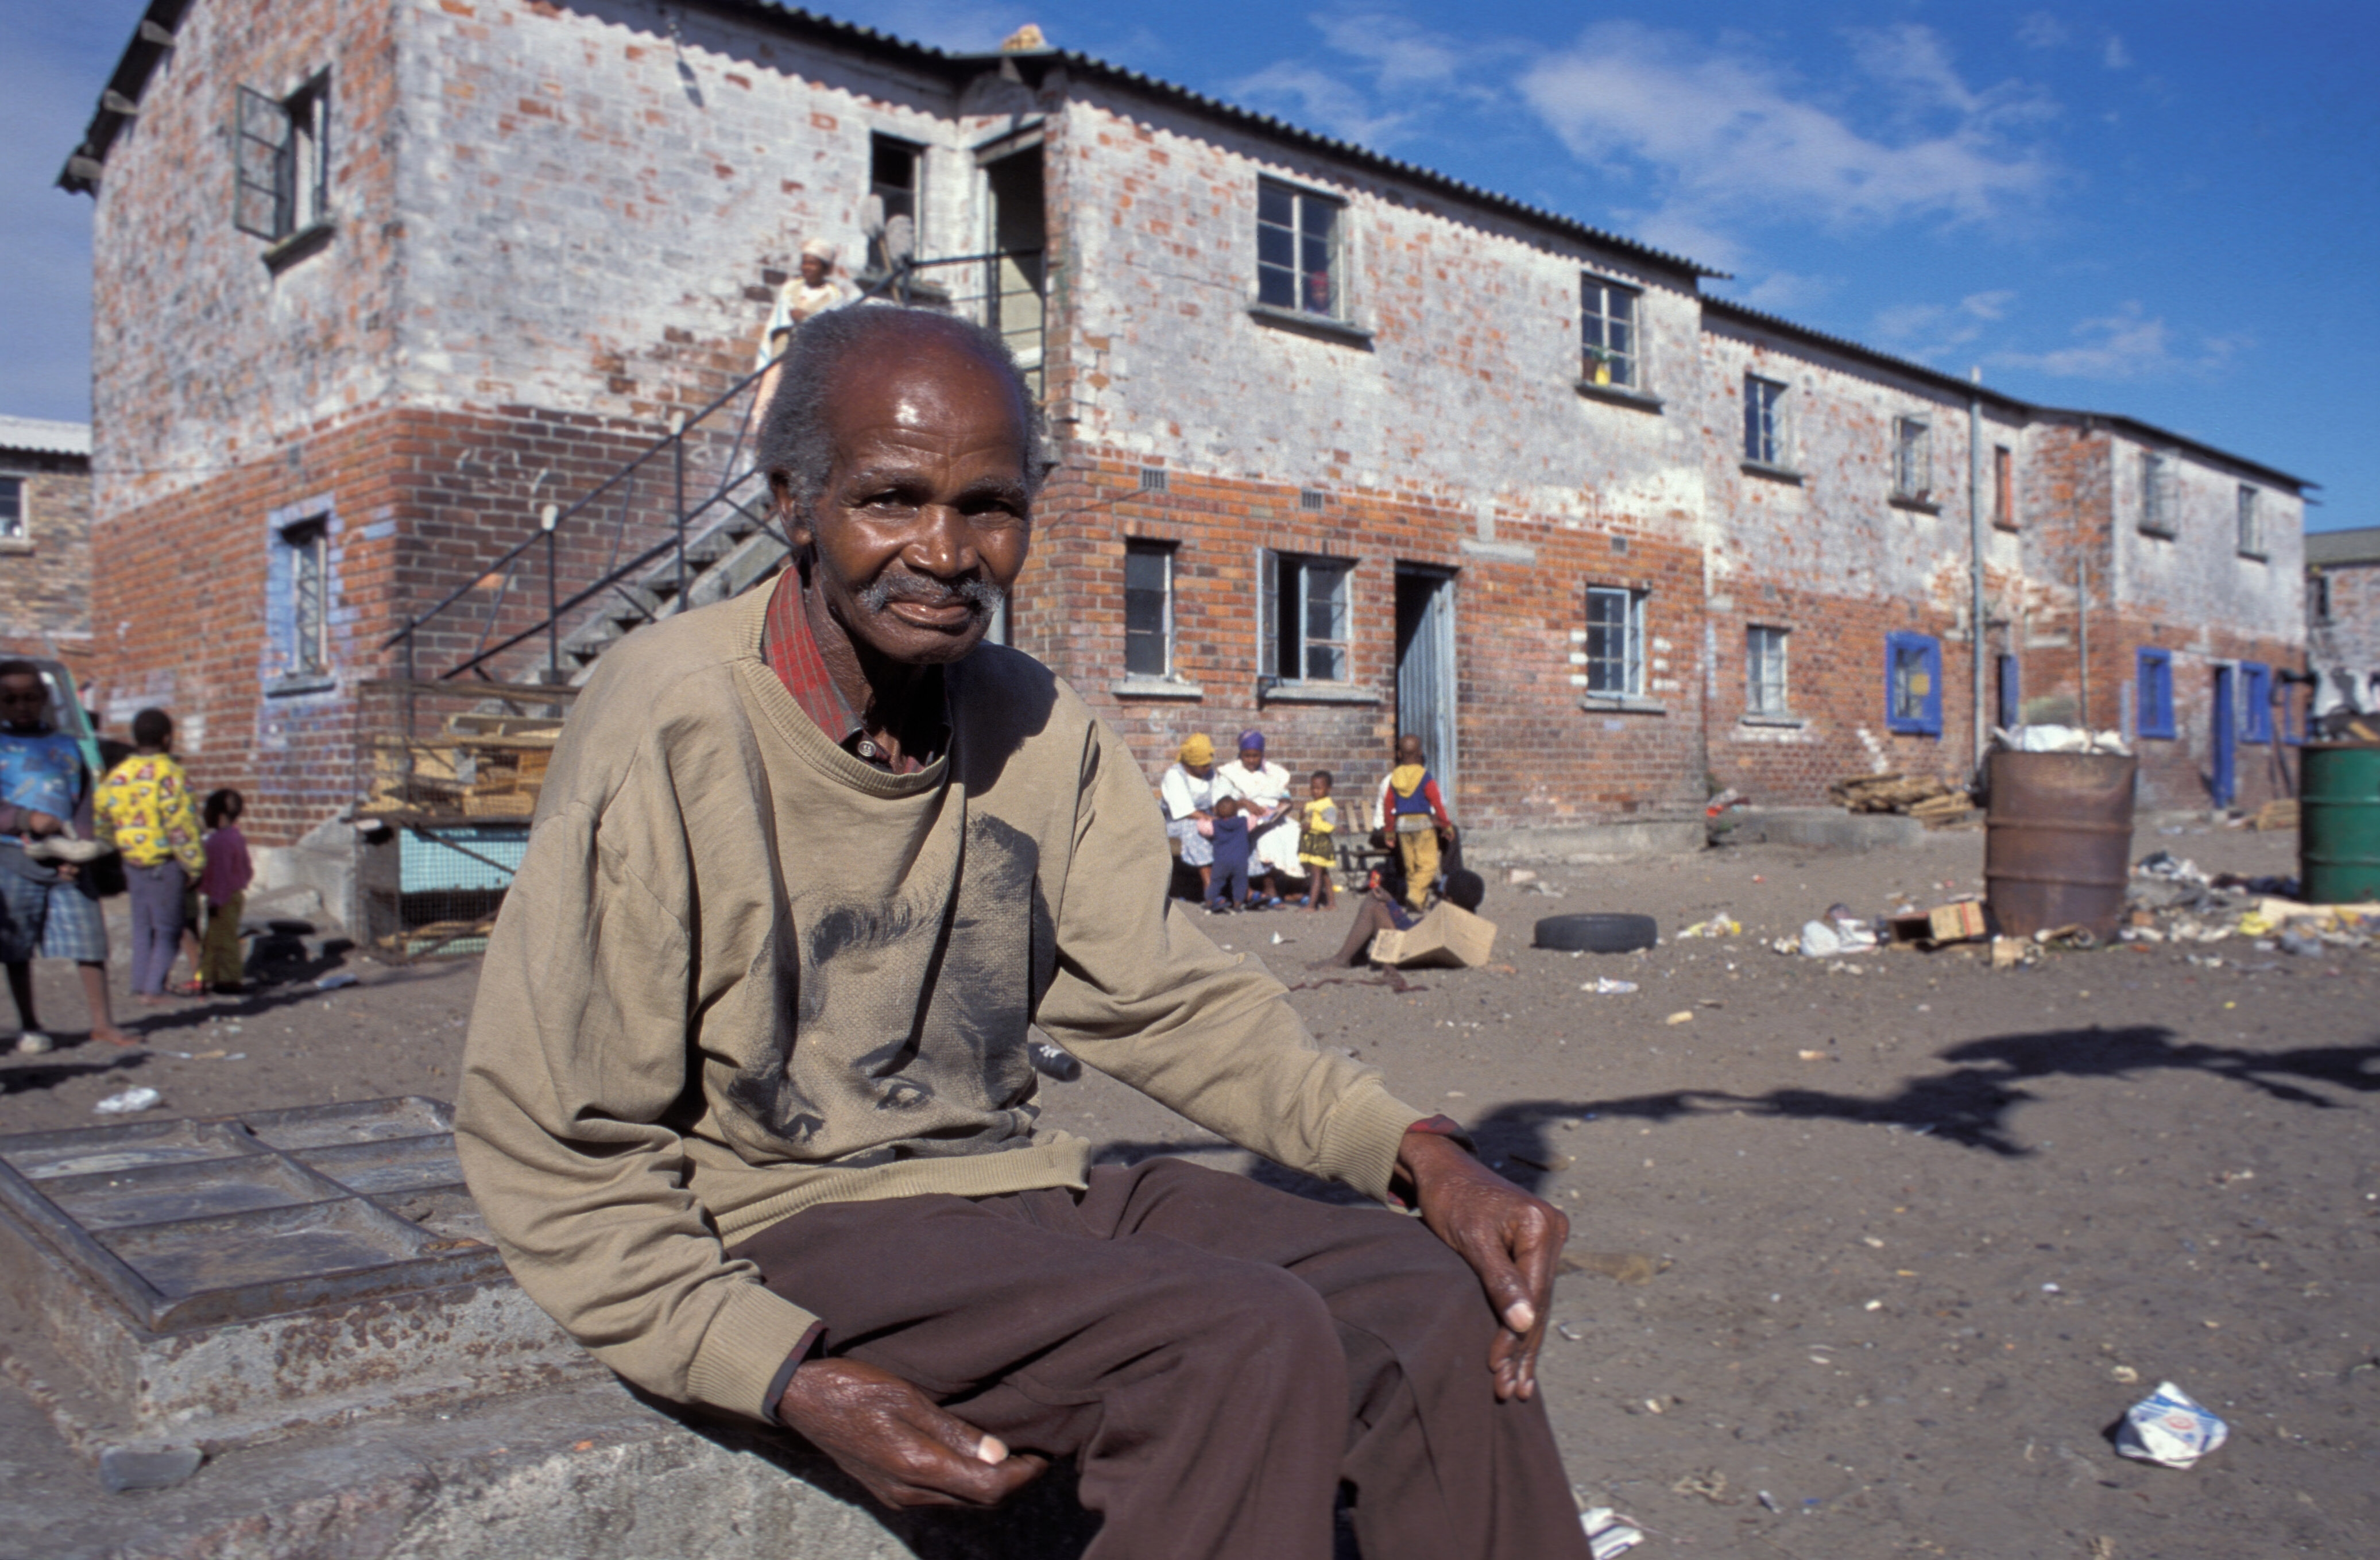 By the end of 2012, about 30 % of South Africans were dependent on some kind of social grant: old man in Langa township,  Cape Town.